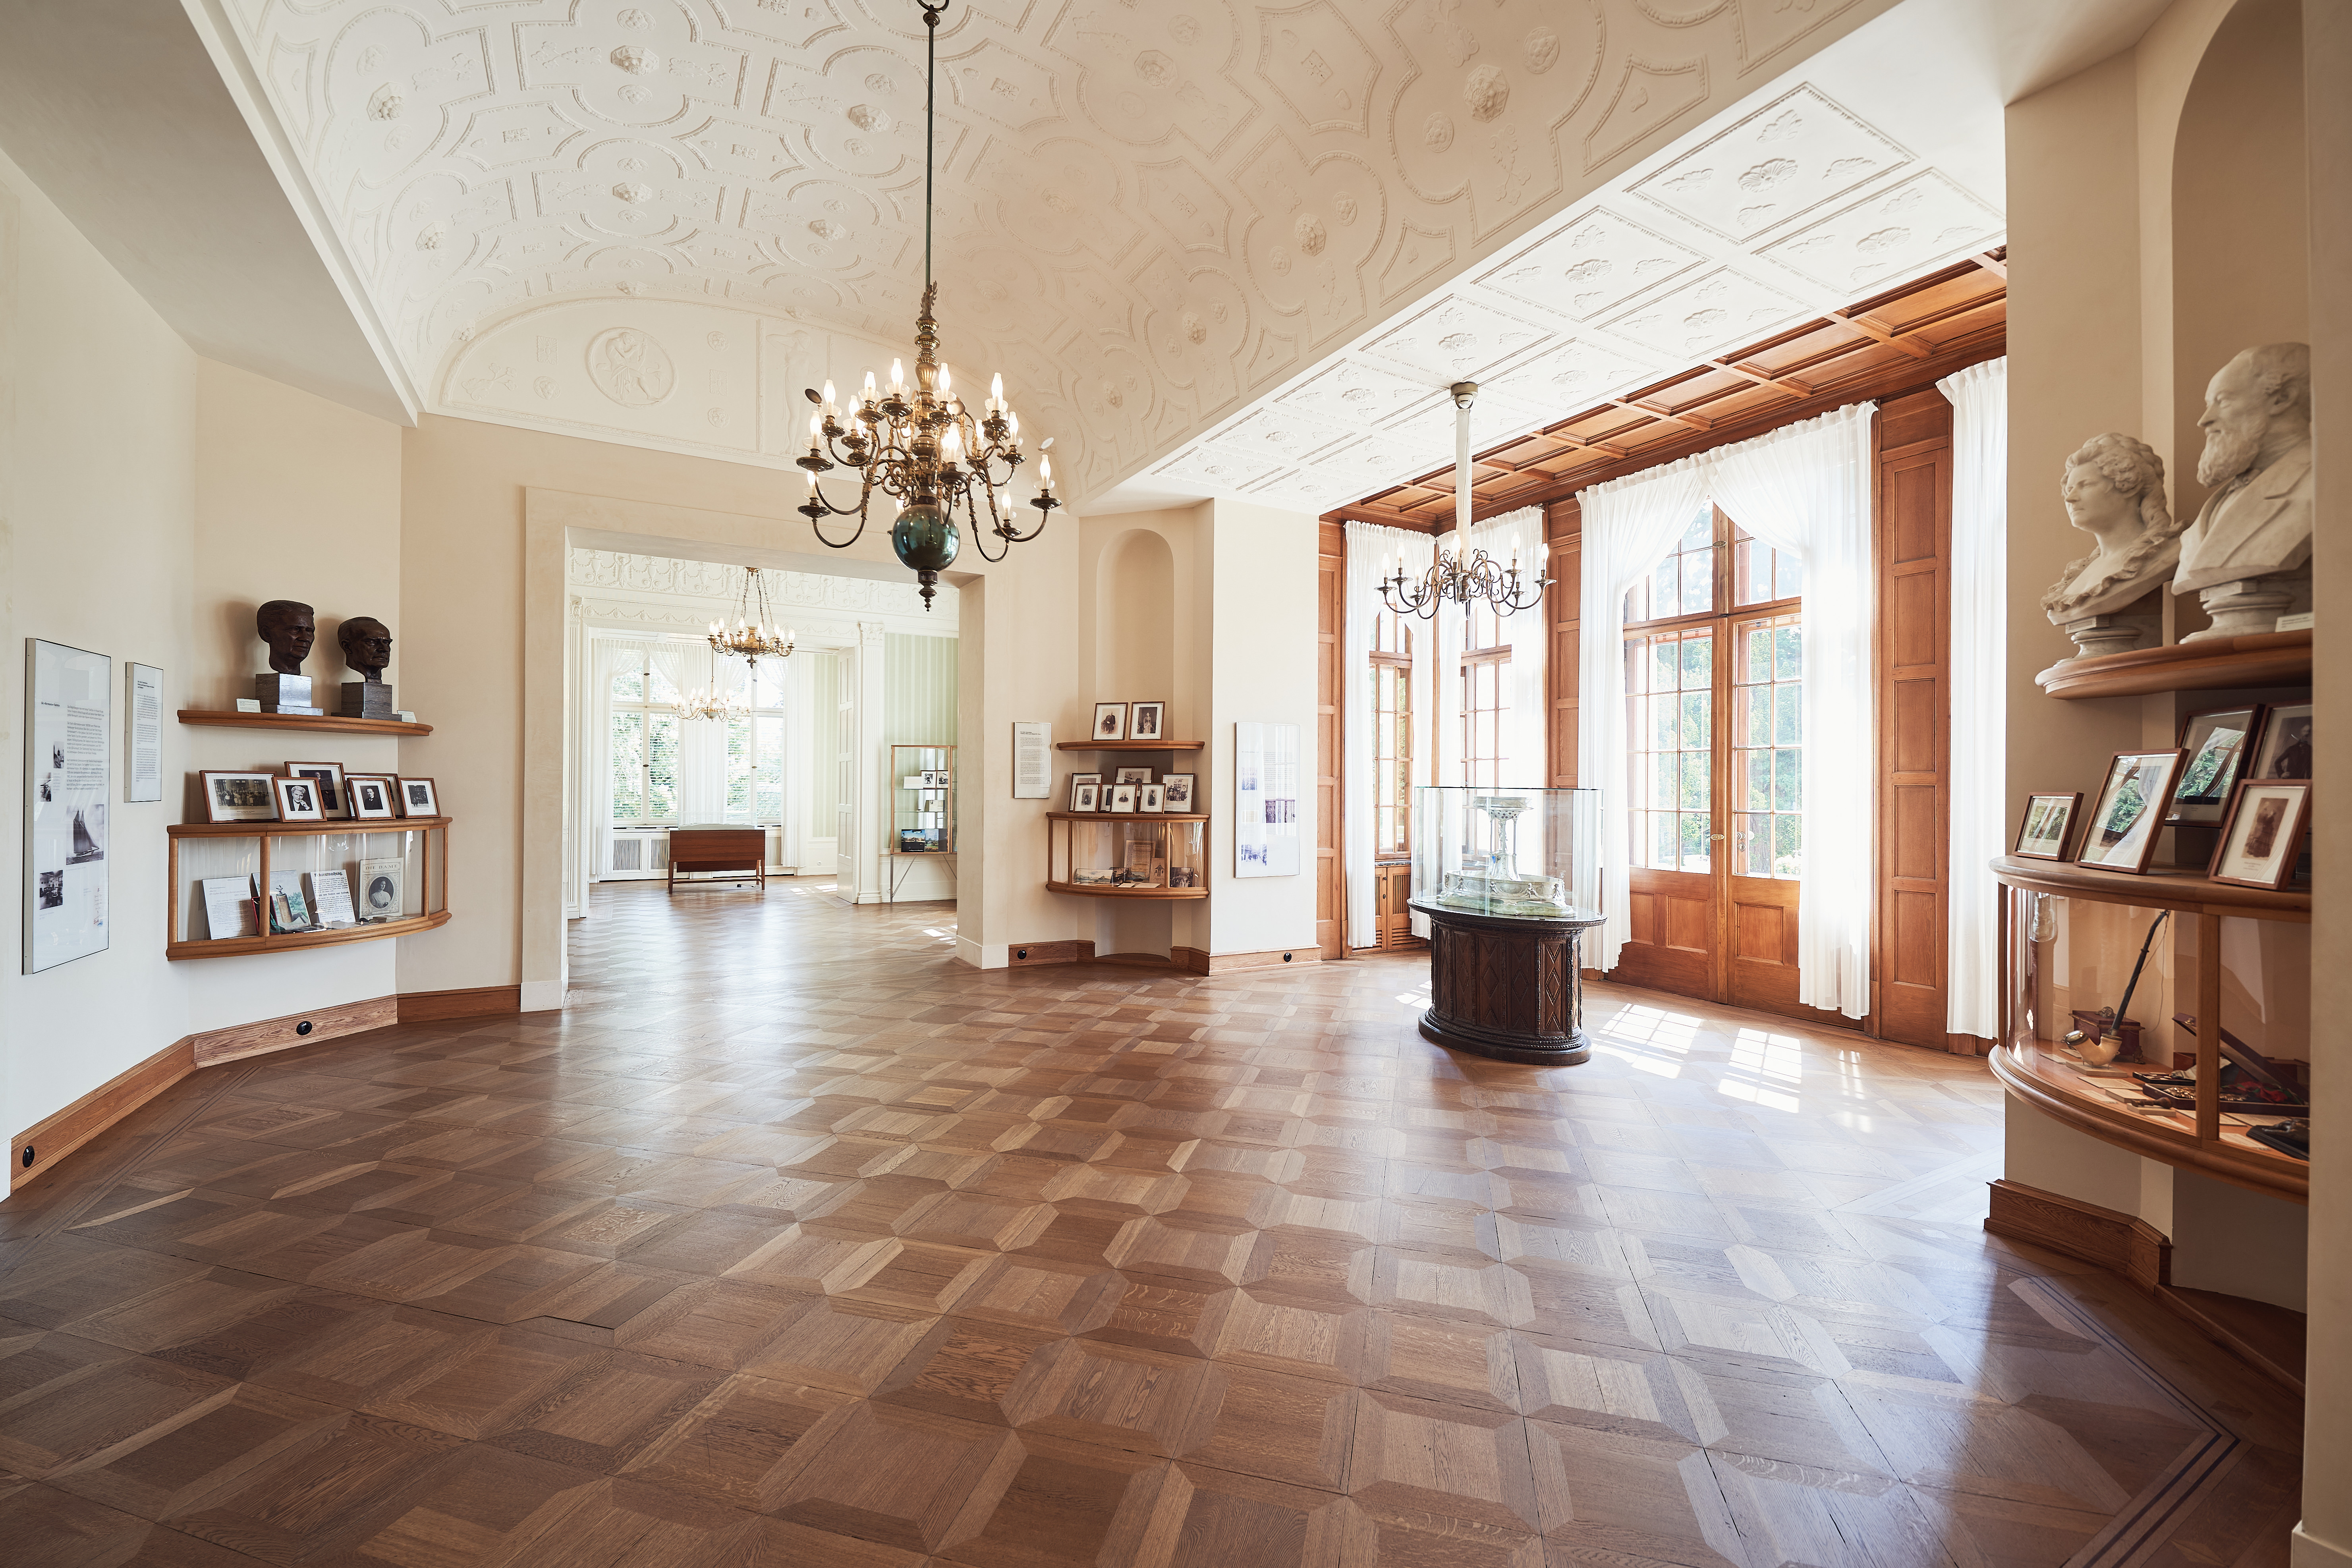 The Krupp Historical Exhibition in the Small House of Villa Hügel informs visitors about the history of the Krupp family, the company, and the Krupp Foundation. – © Krupp-Stiftung/ Peter Gwiazda